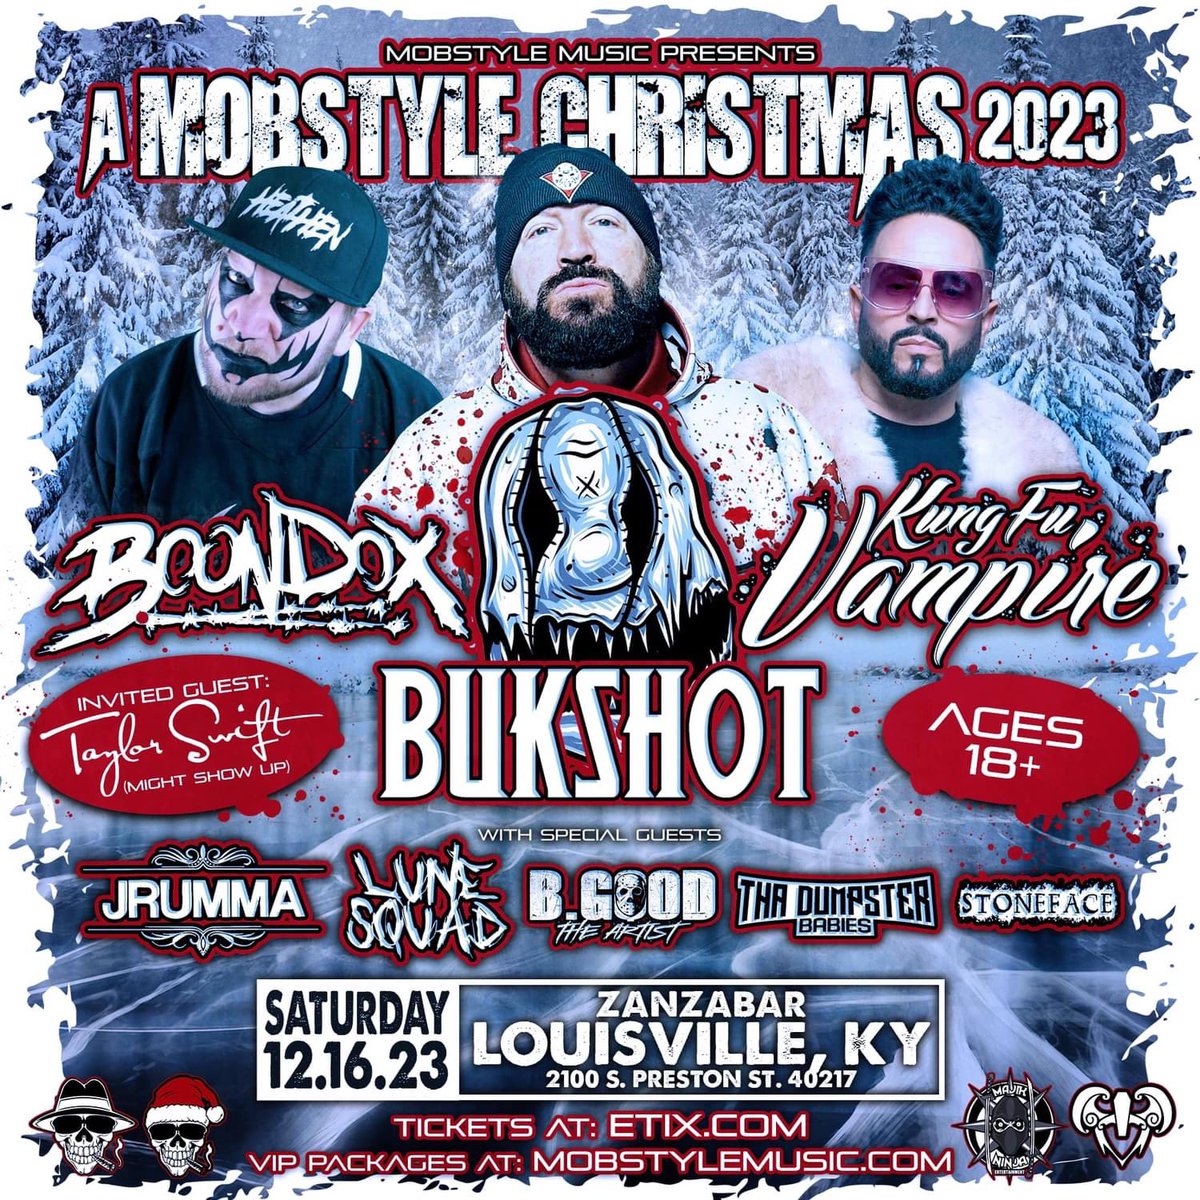 Before regular Christmas, celebrate A Mobstyle Christmas with myself @Bukshizzle @KungFuVampire & many more! 12.16.23 at Zanzabar in Louisville, KY